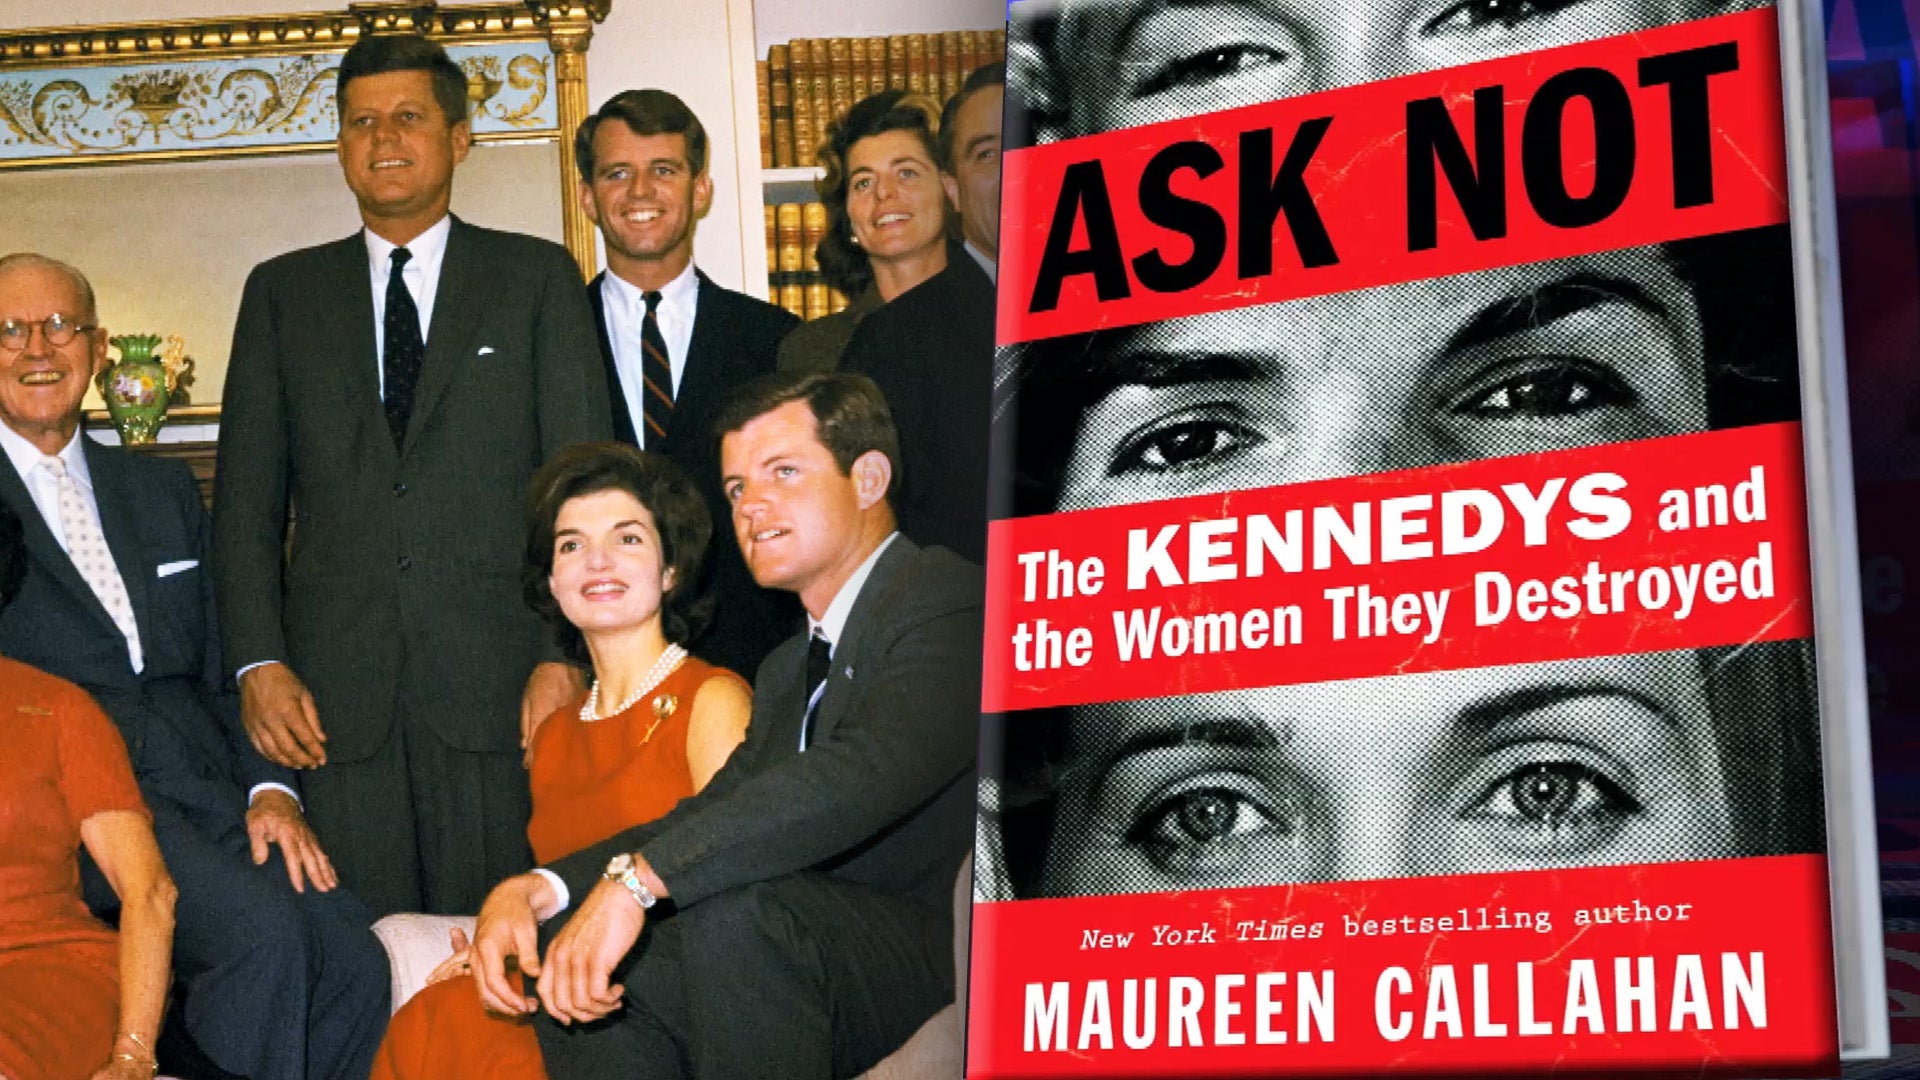 New Book Claims Kennedy Family Has History of Degrading Women